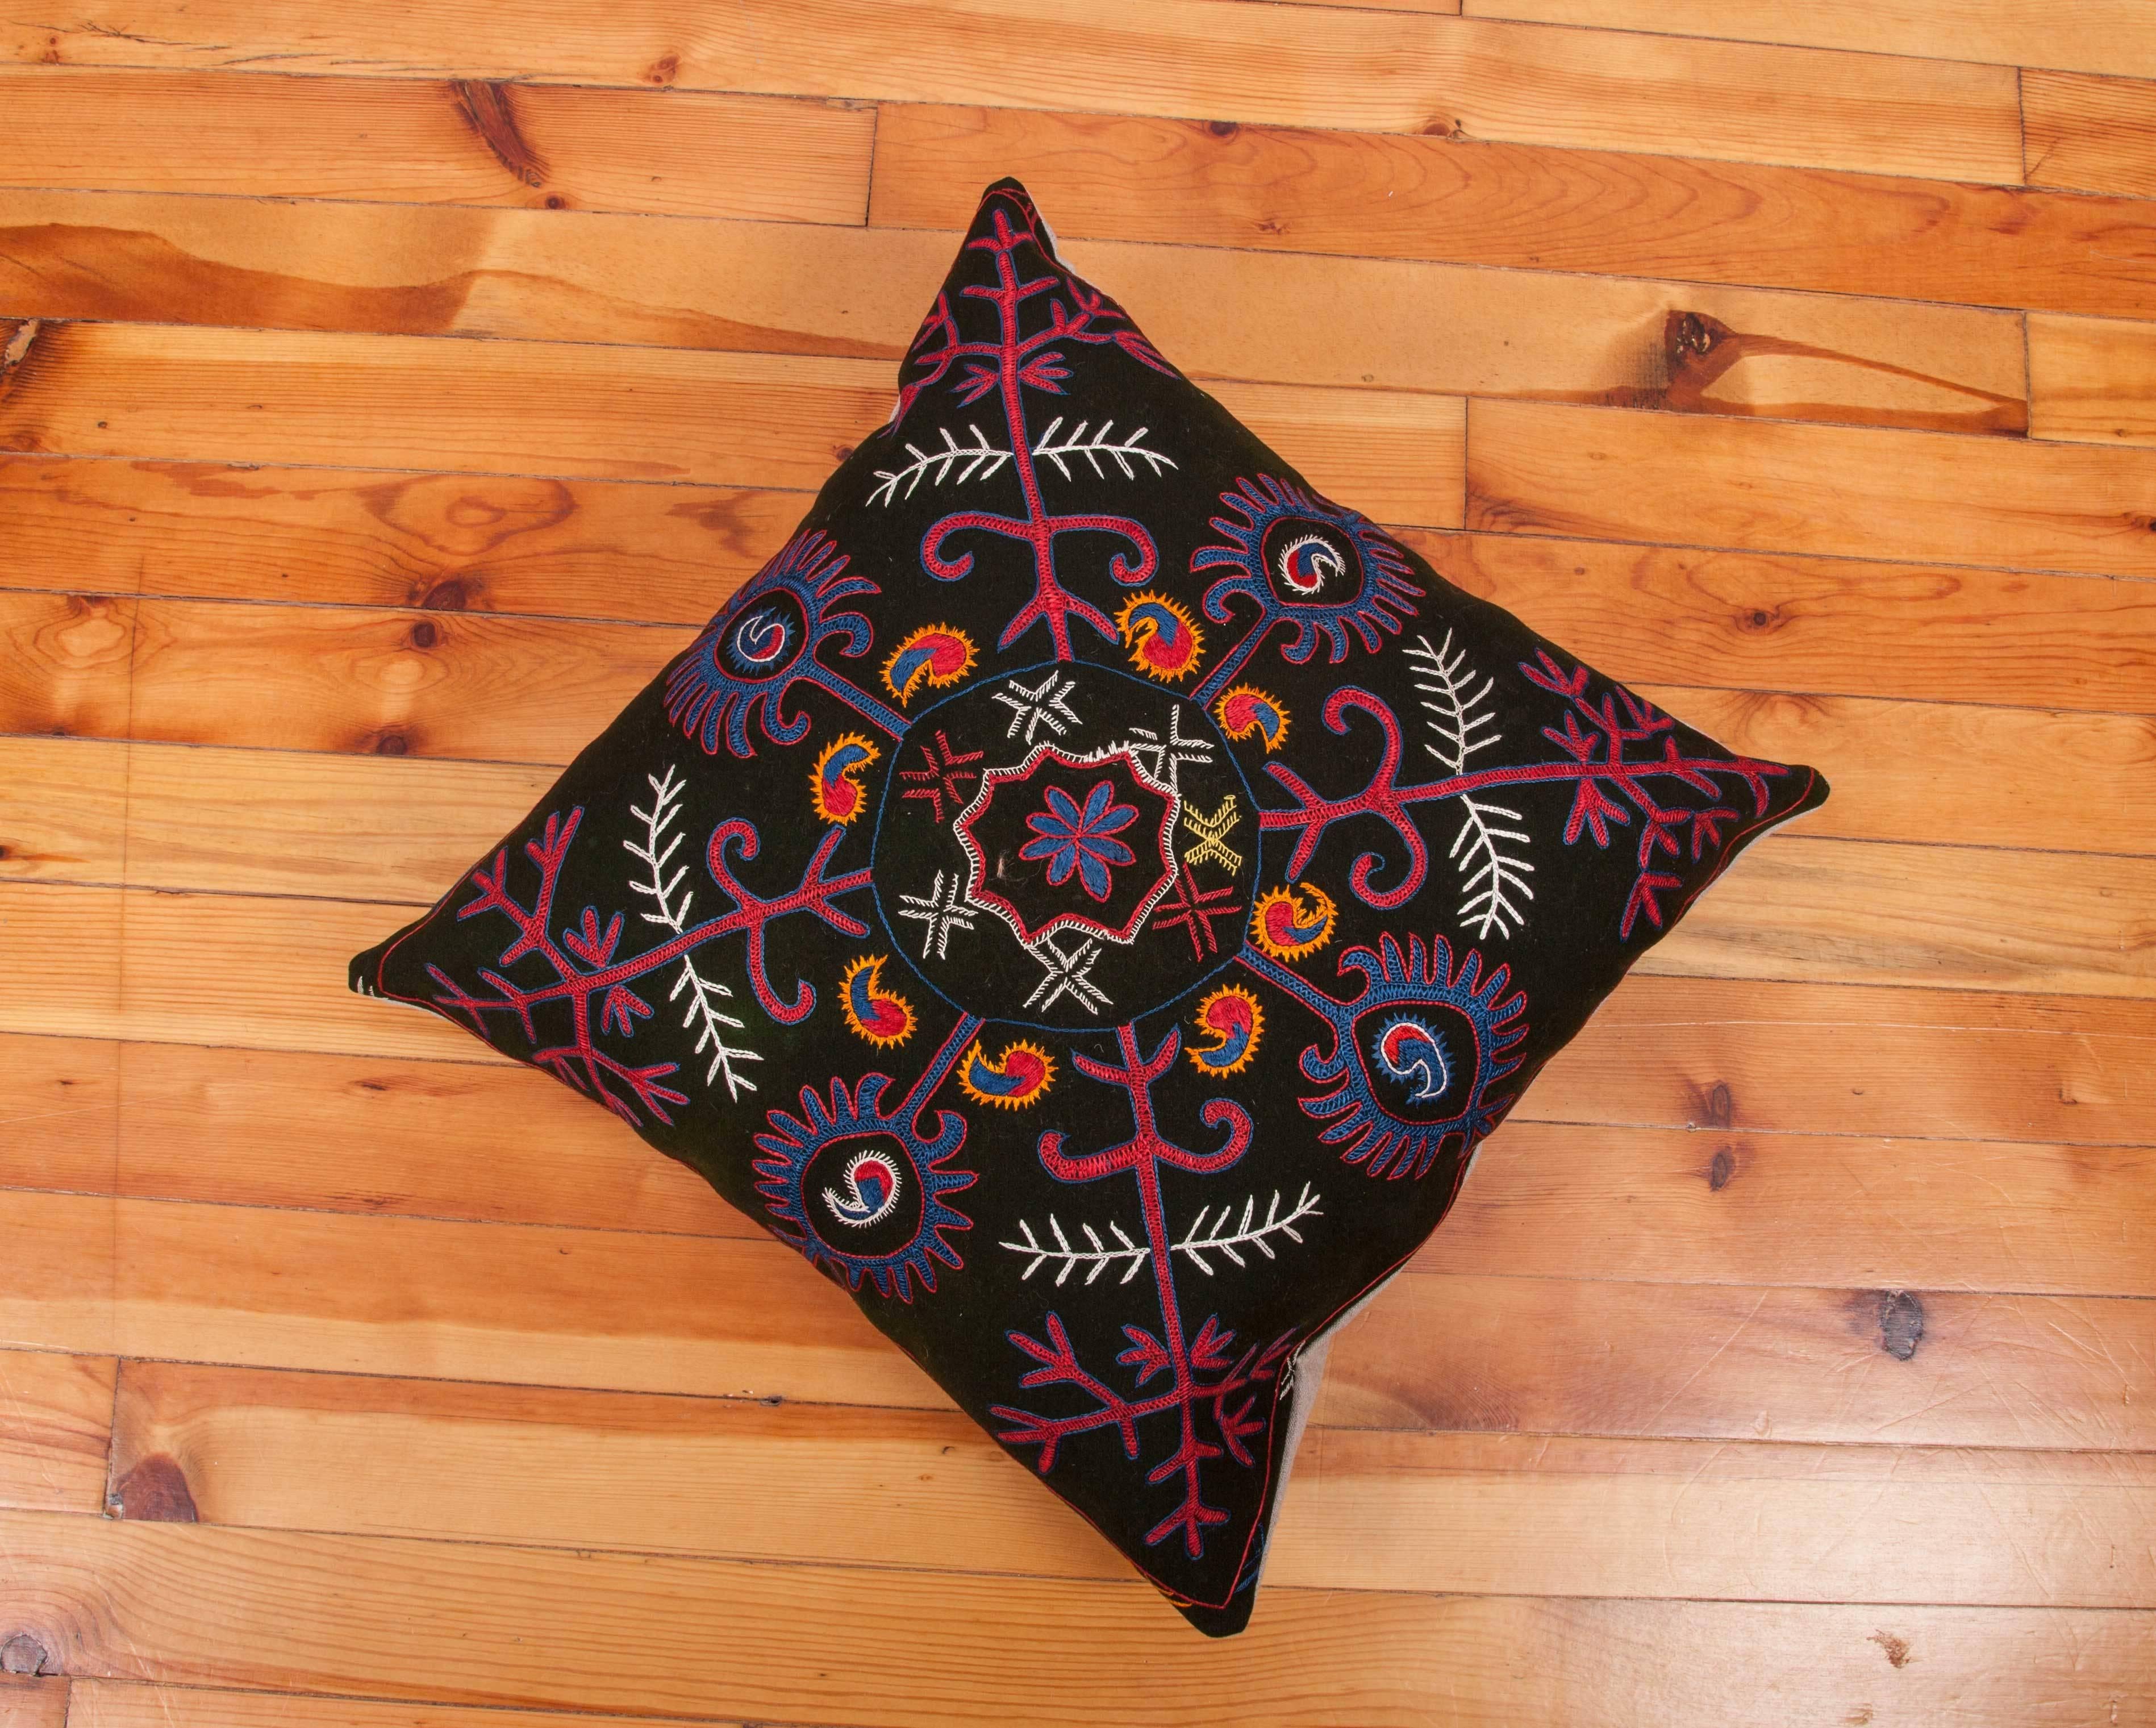 Hand-Woven Pillow Made Out of an Early 20th Century Kyrgyz Embroidery